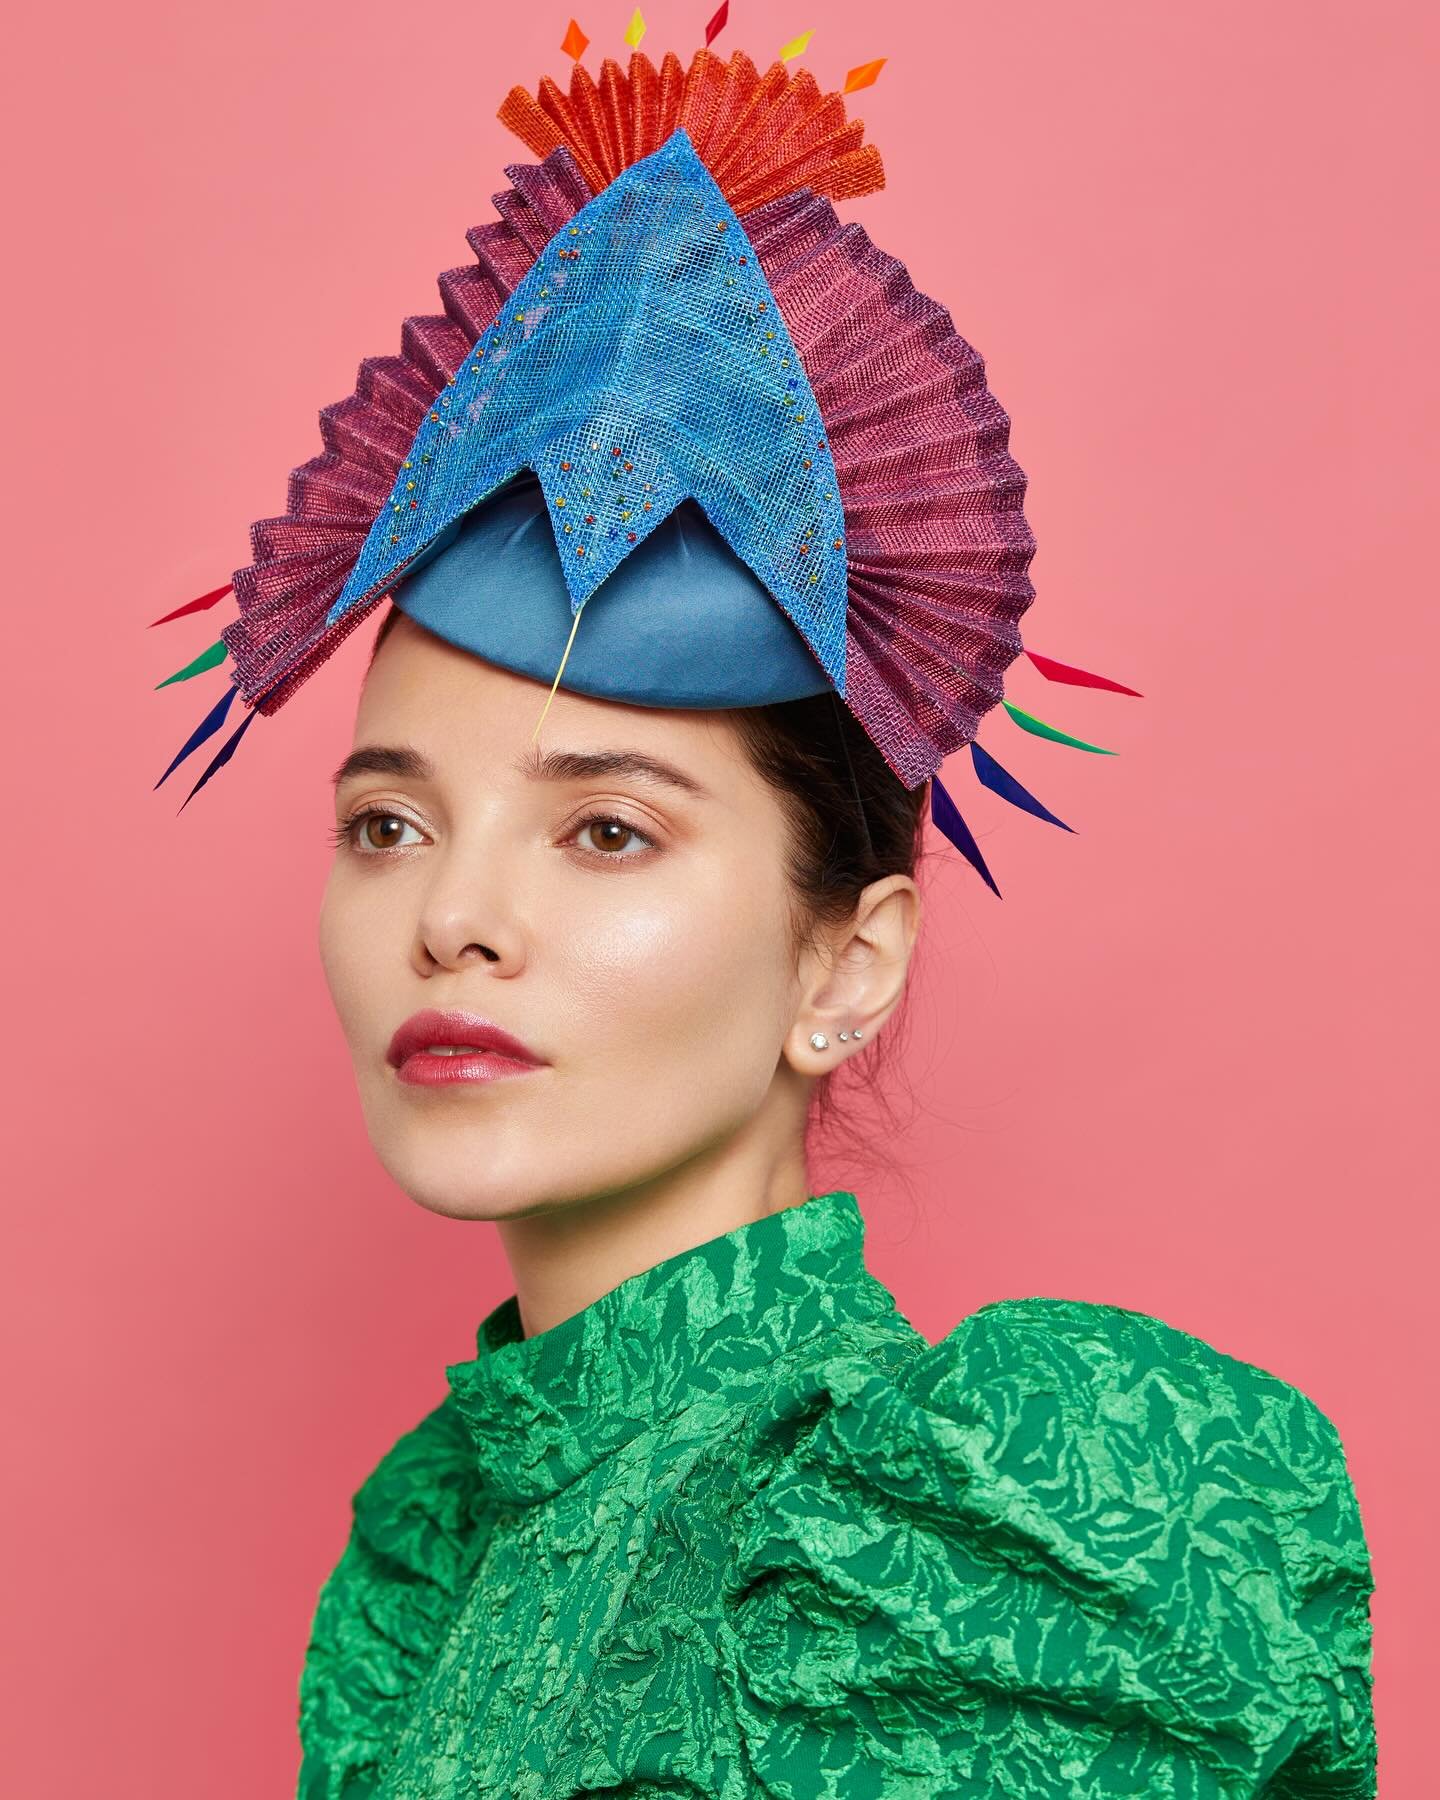 New Collection - Sculptural bird called Para
Made in sinamay straw with bamboo silk and hand cut bright feather detail 
.
Photographer @laurenmarshphotography 
Makeup artist @anitastevensmua 
Model @alena__ts_ 
.
.
.
#bird #sinamay#hat #millinery #mi